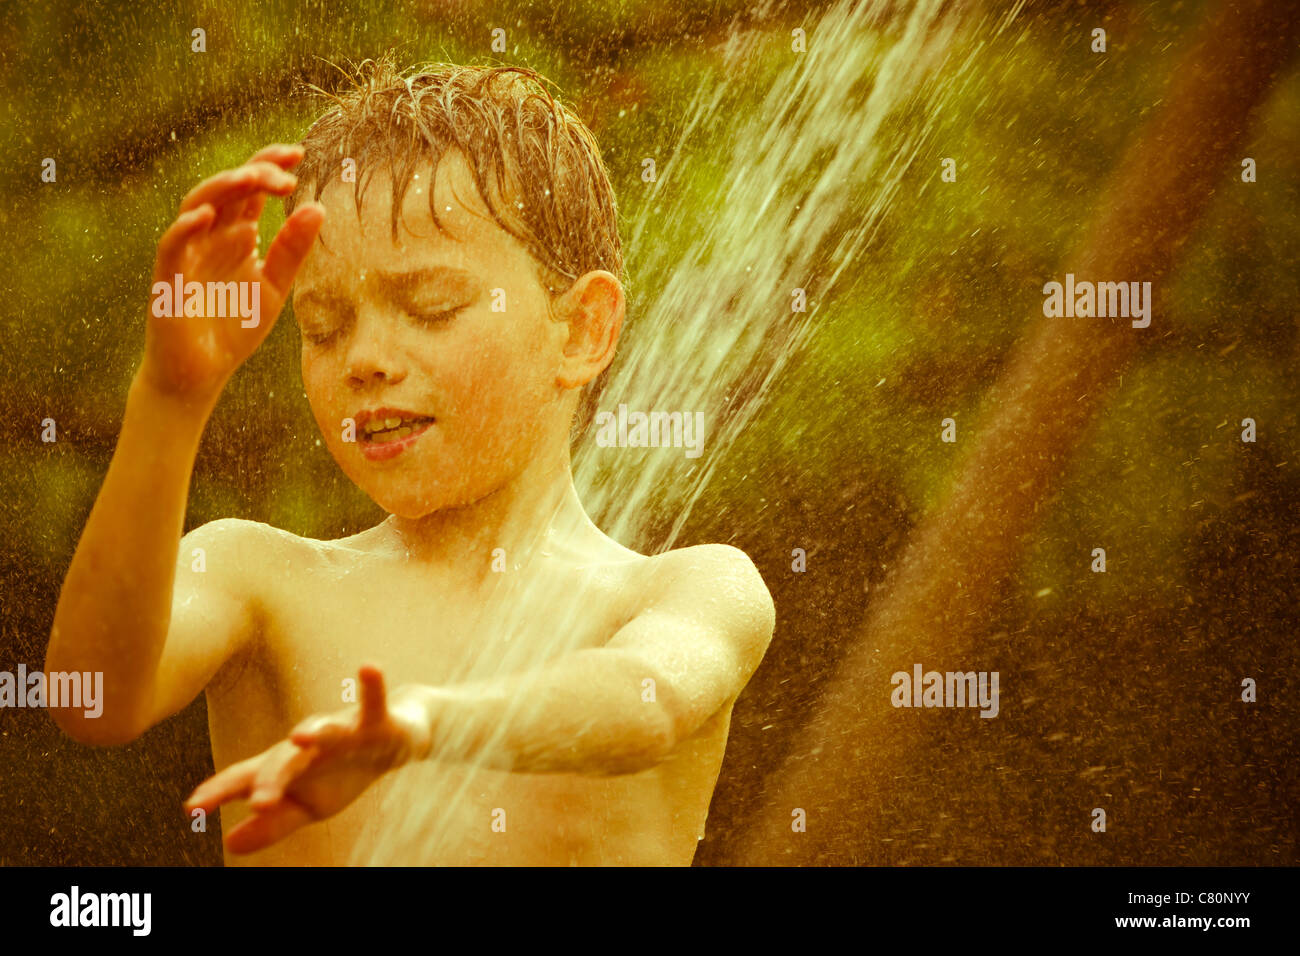 Vintage portrait of a young child playing with water Stock Photo